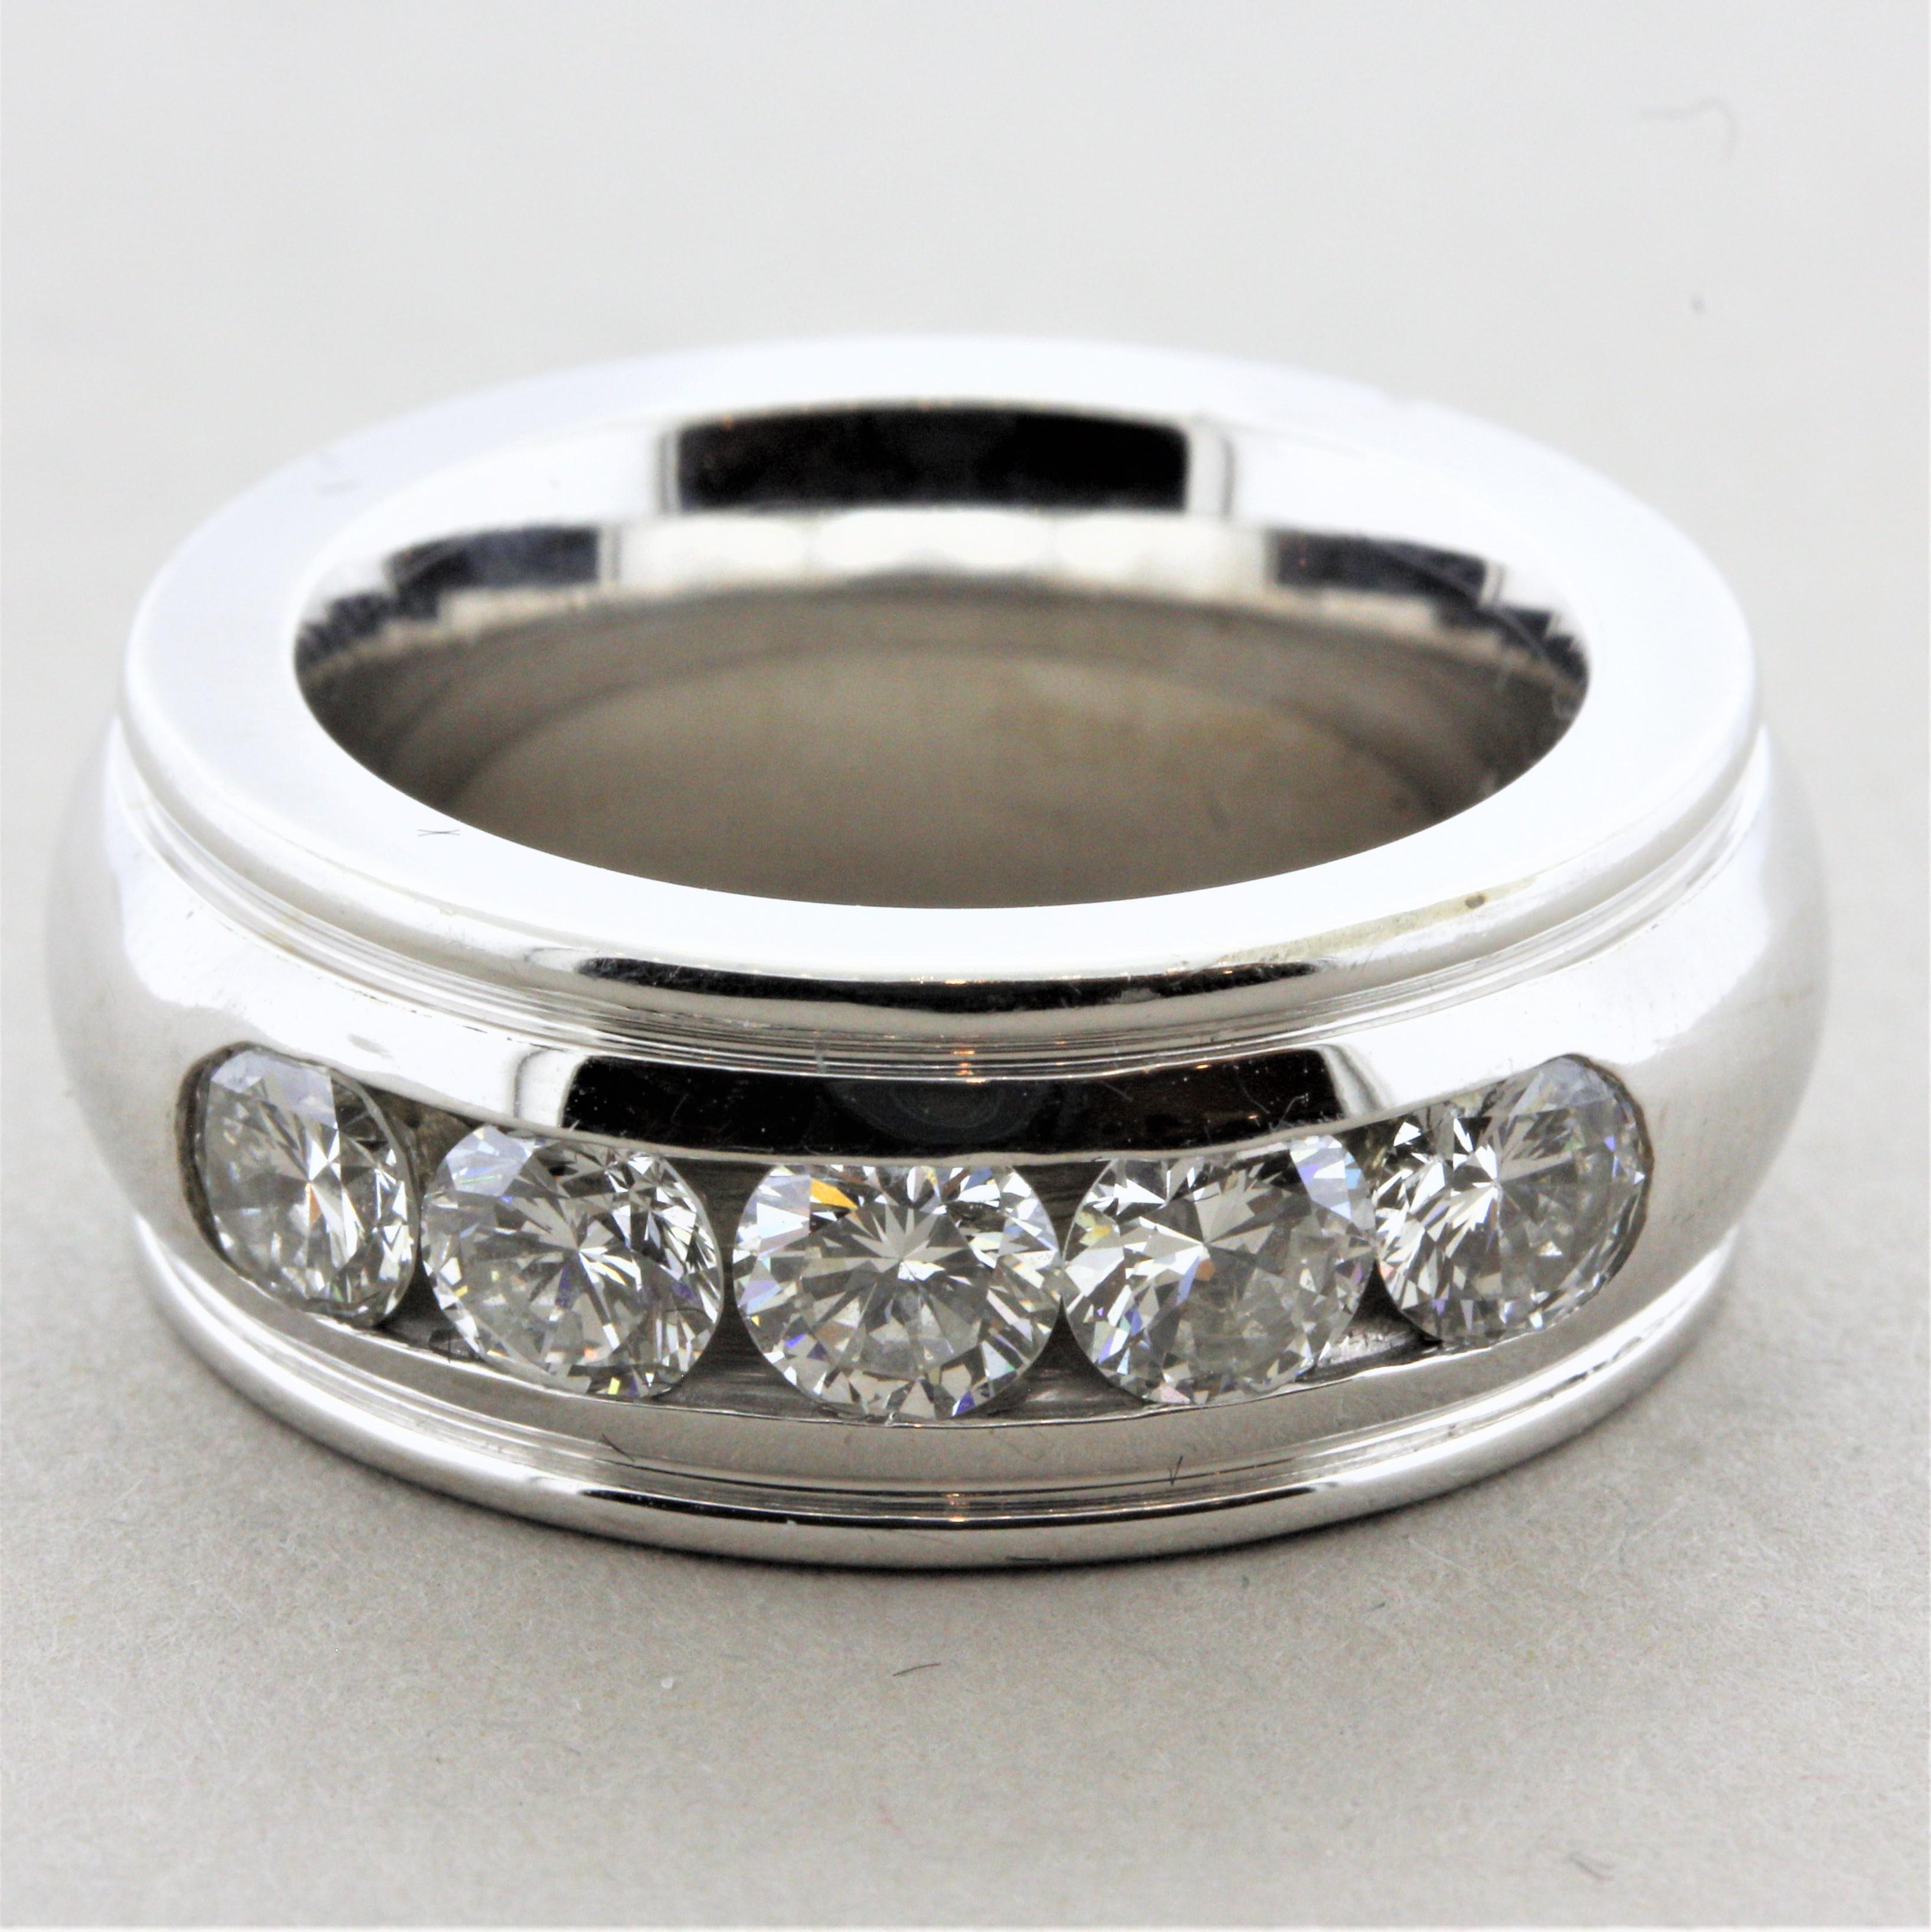 A large band ring featuring 5 round brilliant-cut diamonds which are channel-set and weigh 1.60 carts. Made in 14k white gold with a comfort fit design making it comfortable to wear.

Ring Size 6vvvv